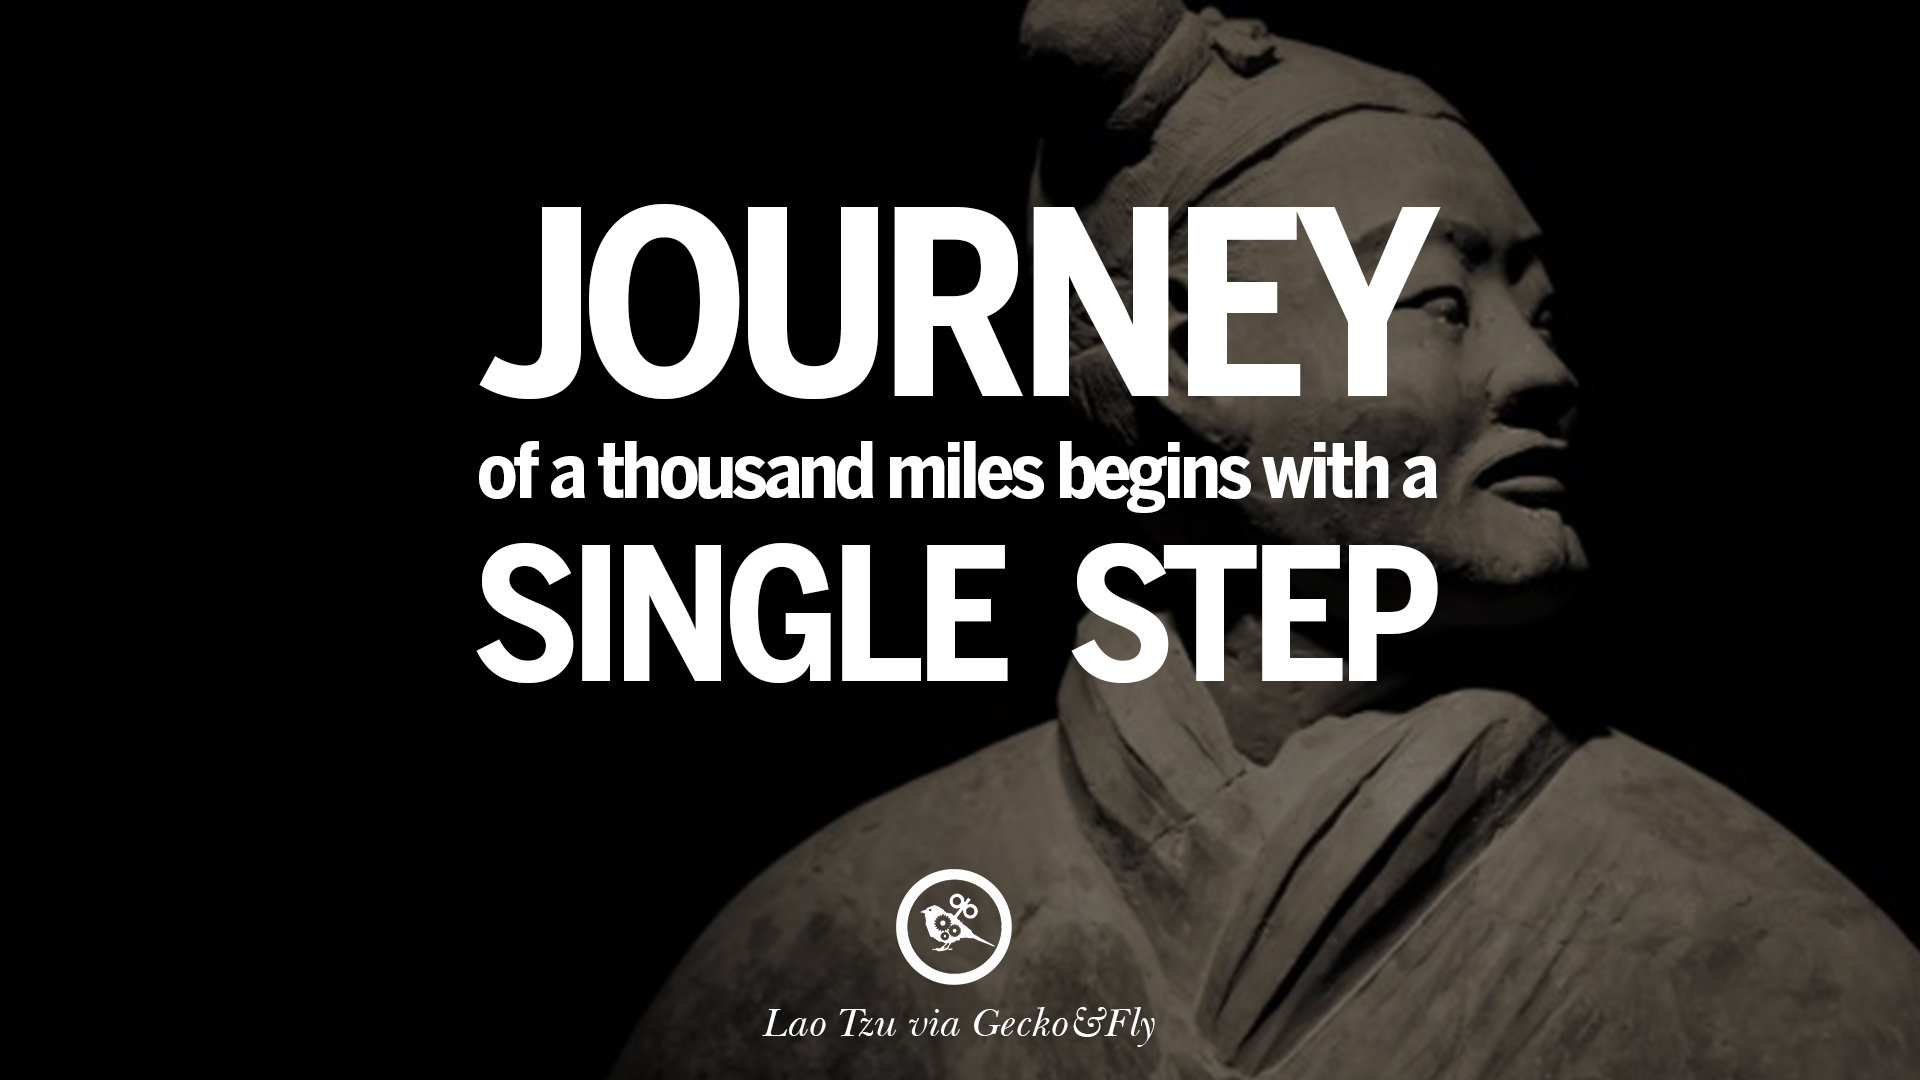 journey in business quotes